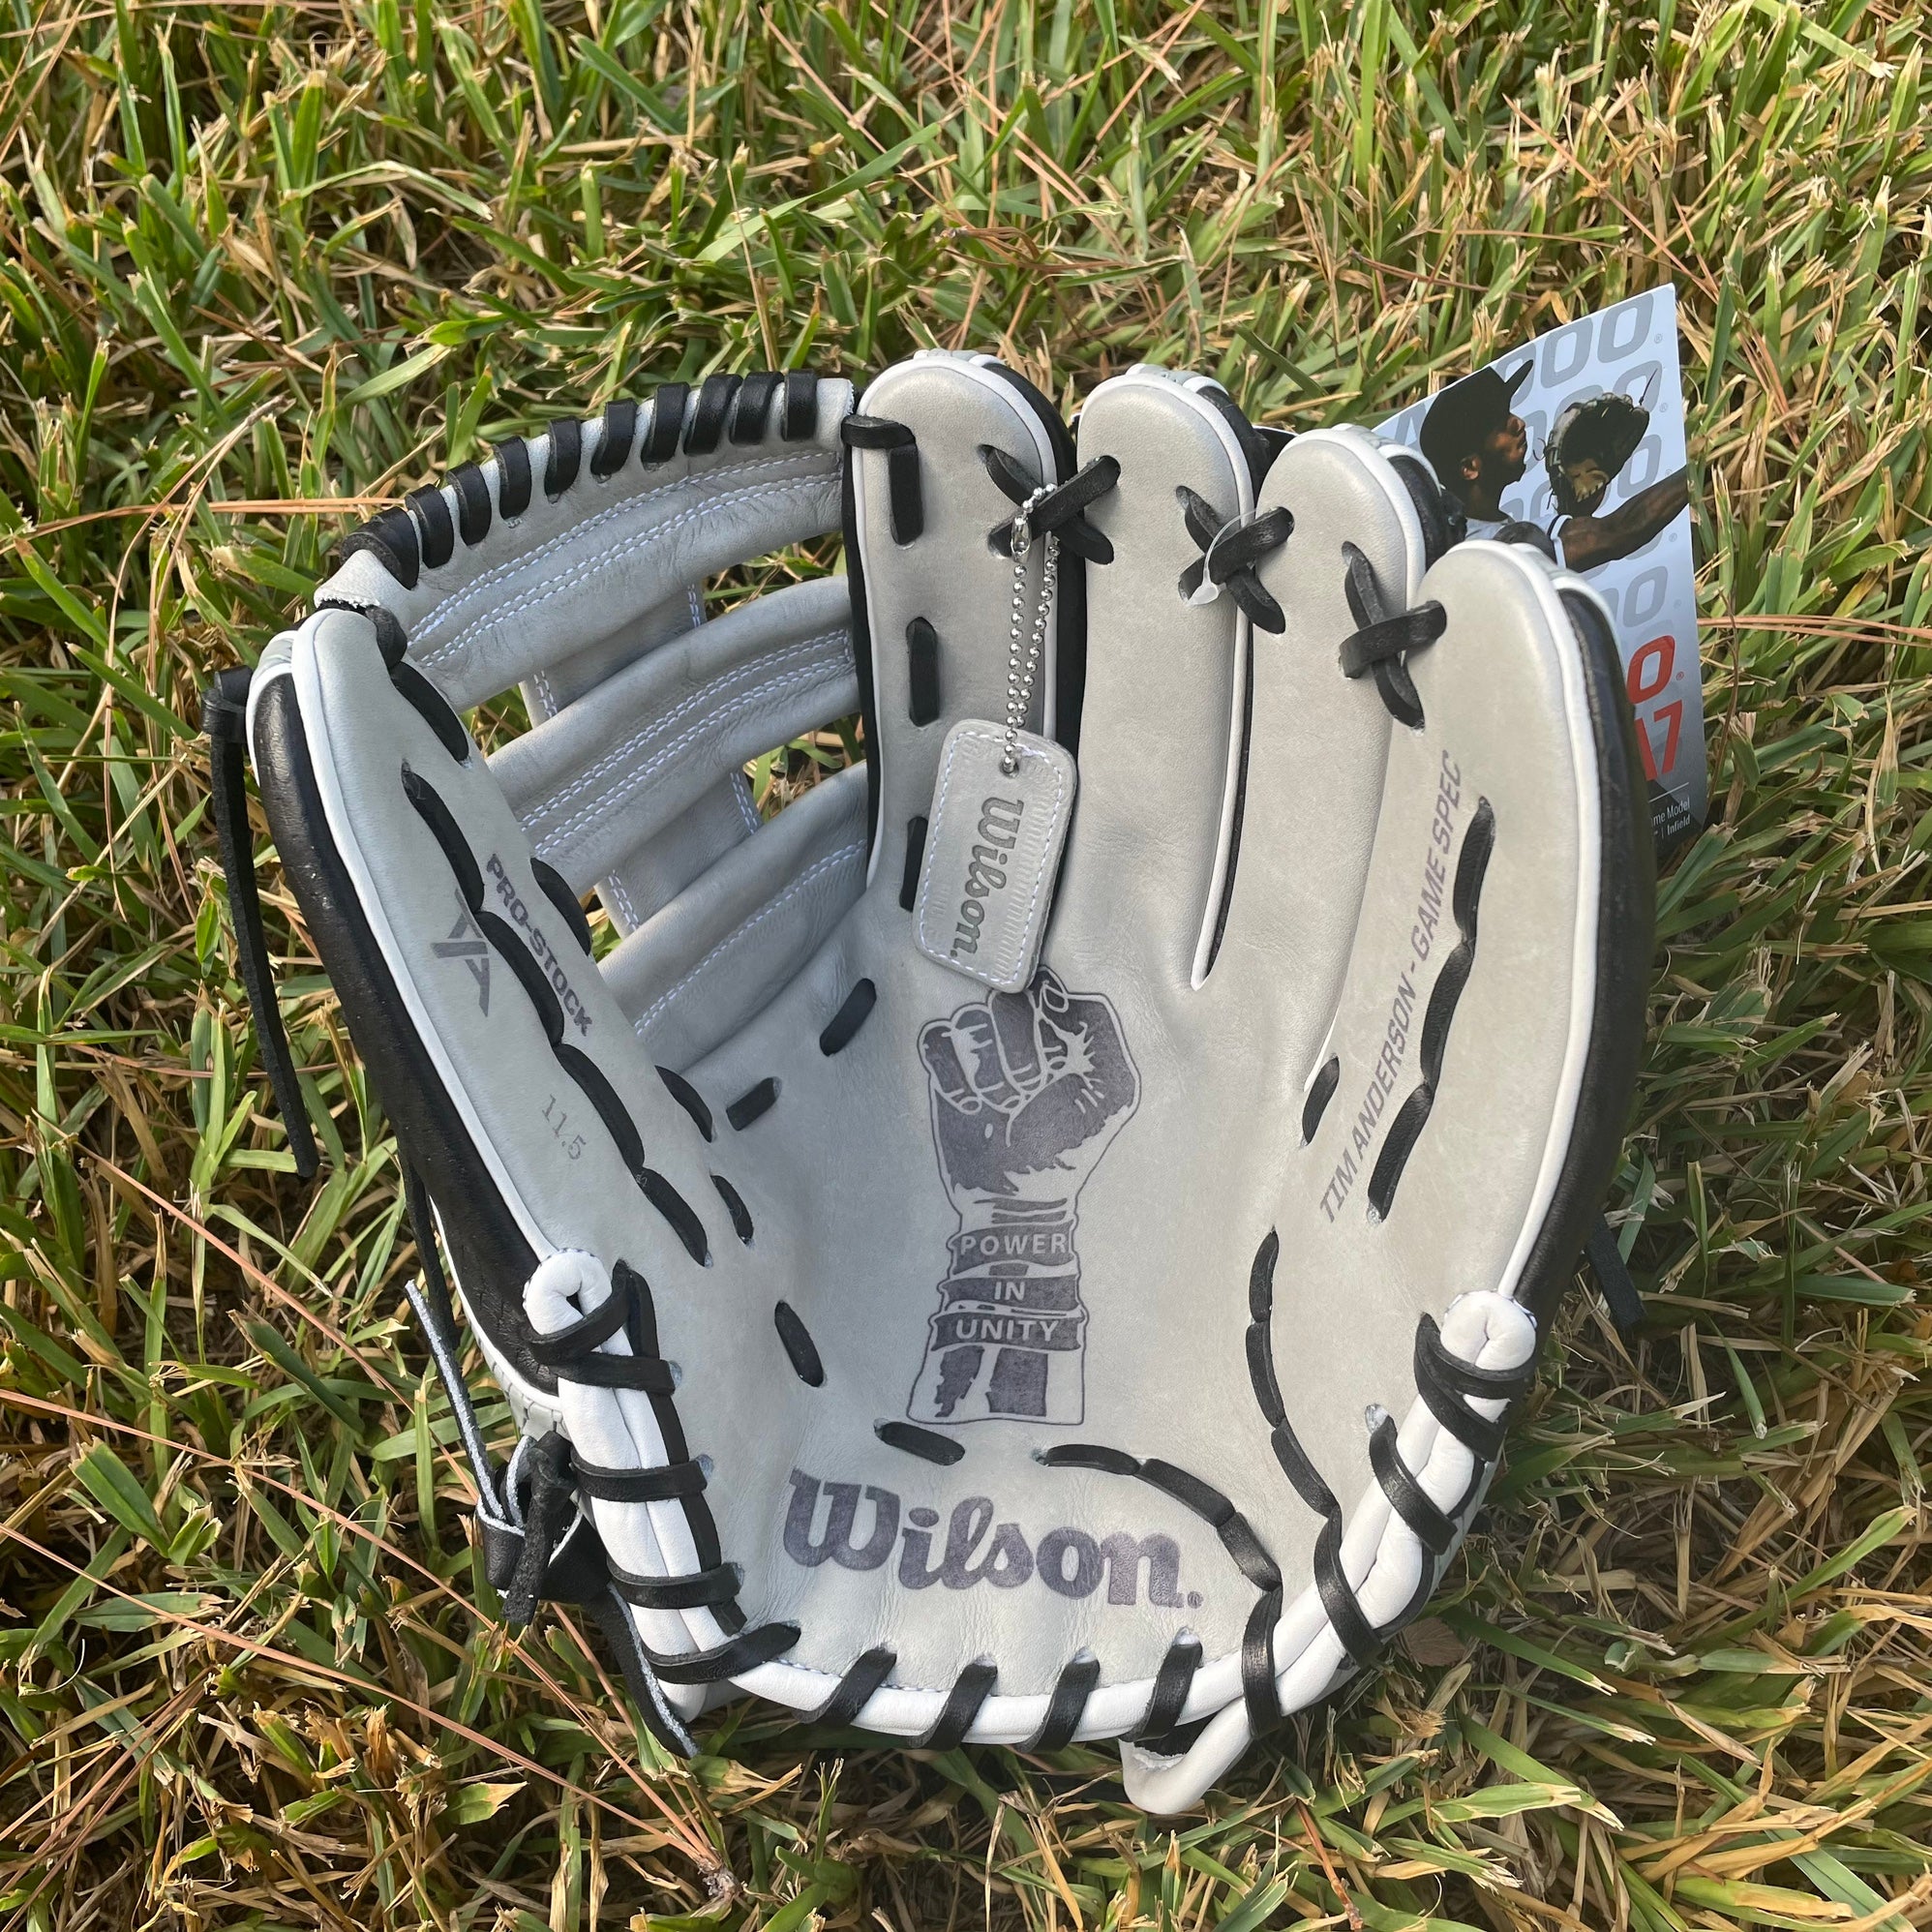 Building Tim Anderson's 2022 A2000 Game Model Baseball Glove